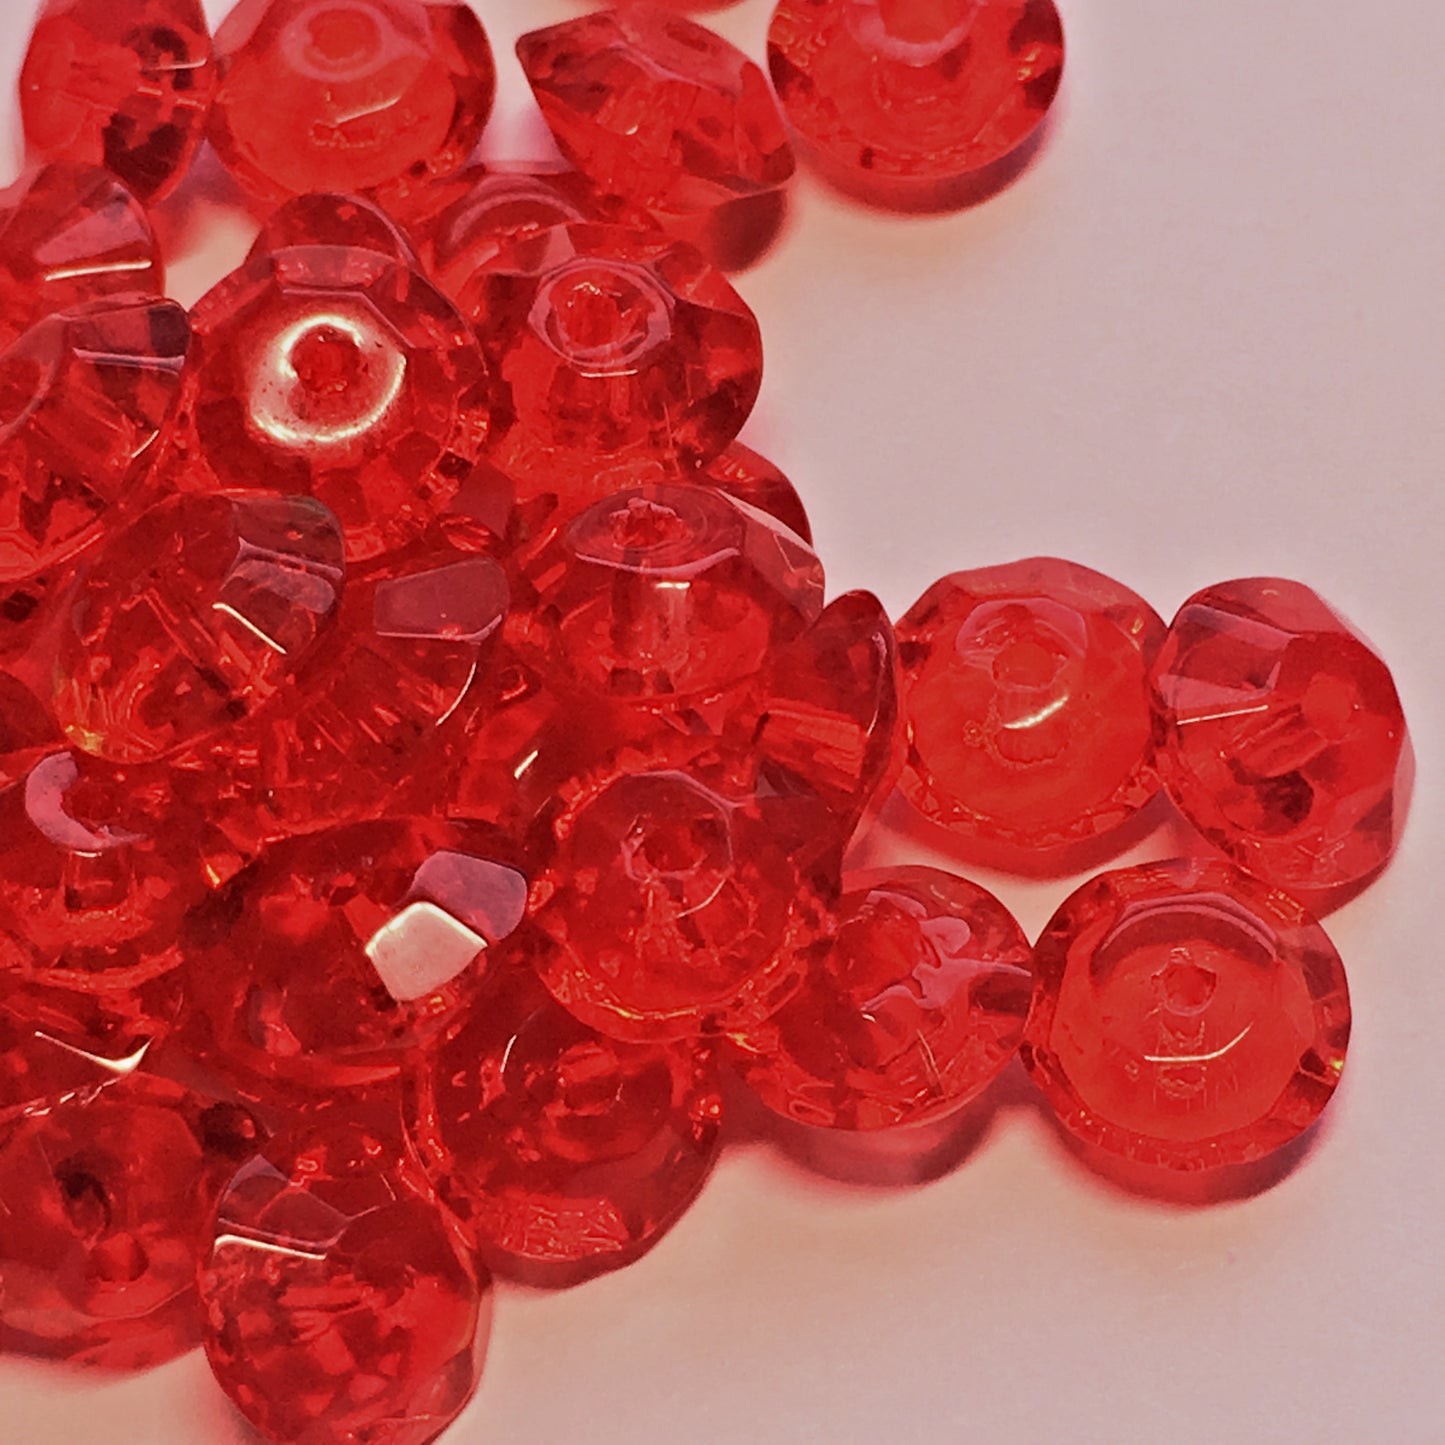 Transparent Ruby Red Glass Faceted Saucer Beads, 8 x 4 mm, 50 Beads